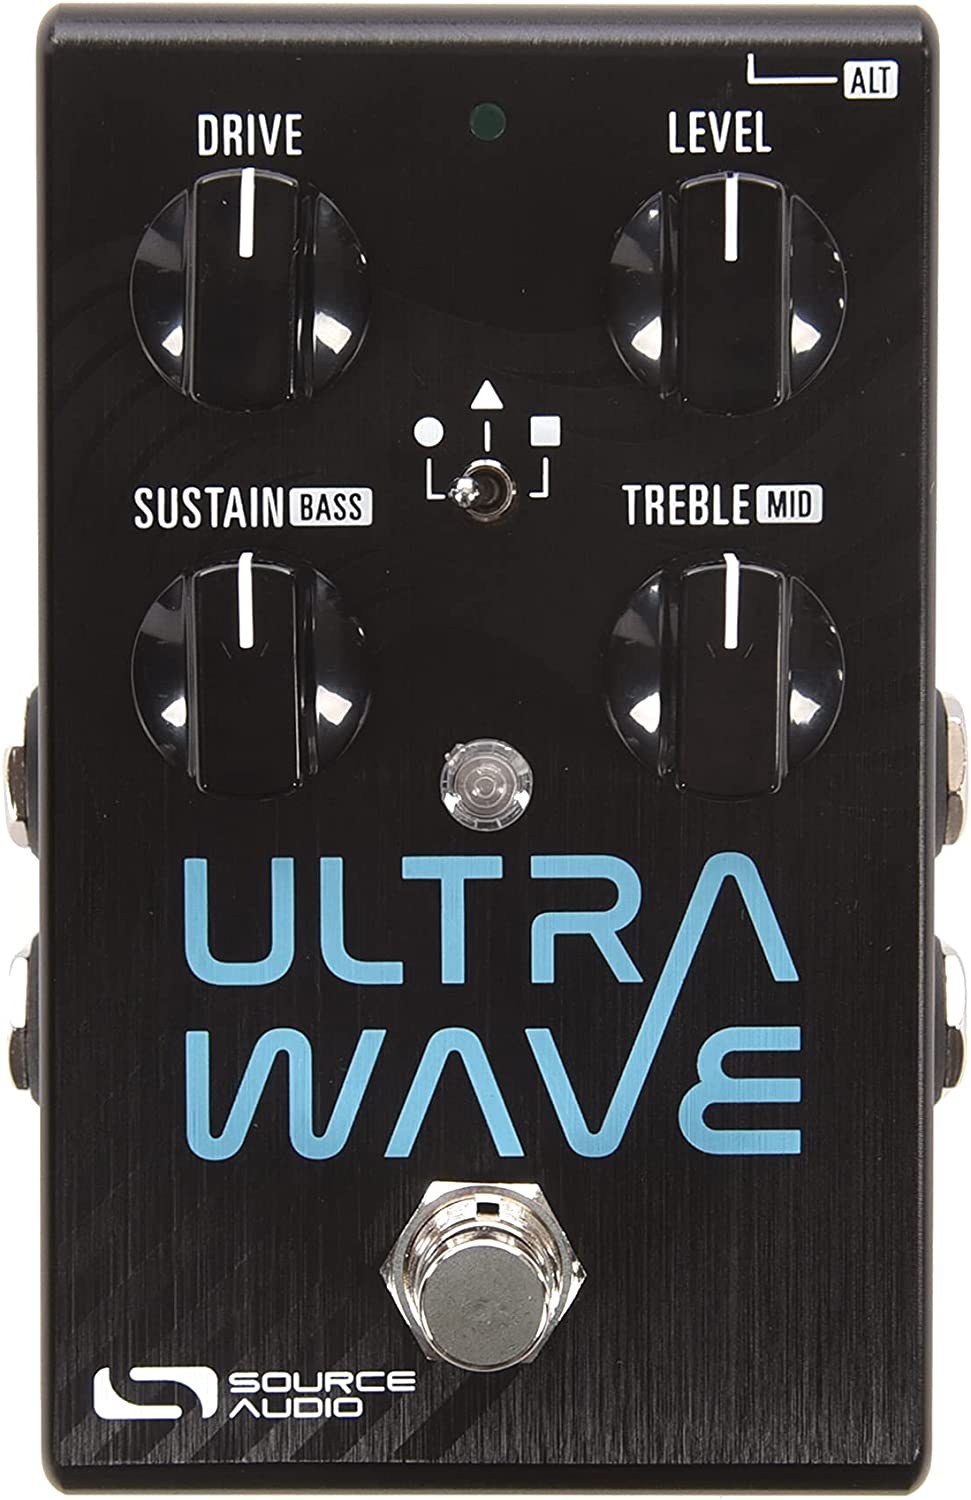 Source Audio One Series Ultrawave Multiband Guitar Processor Pedal on a white background